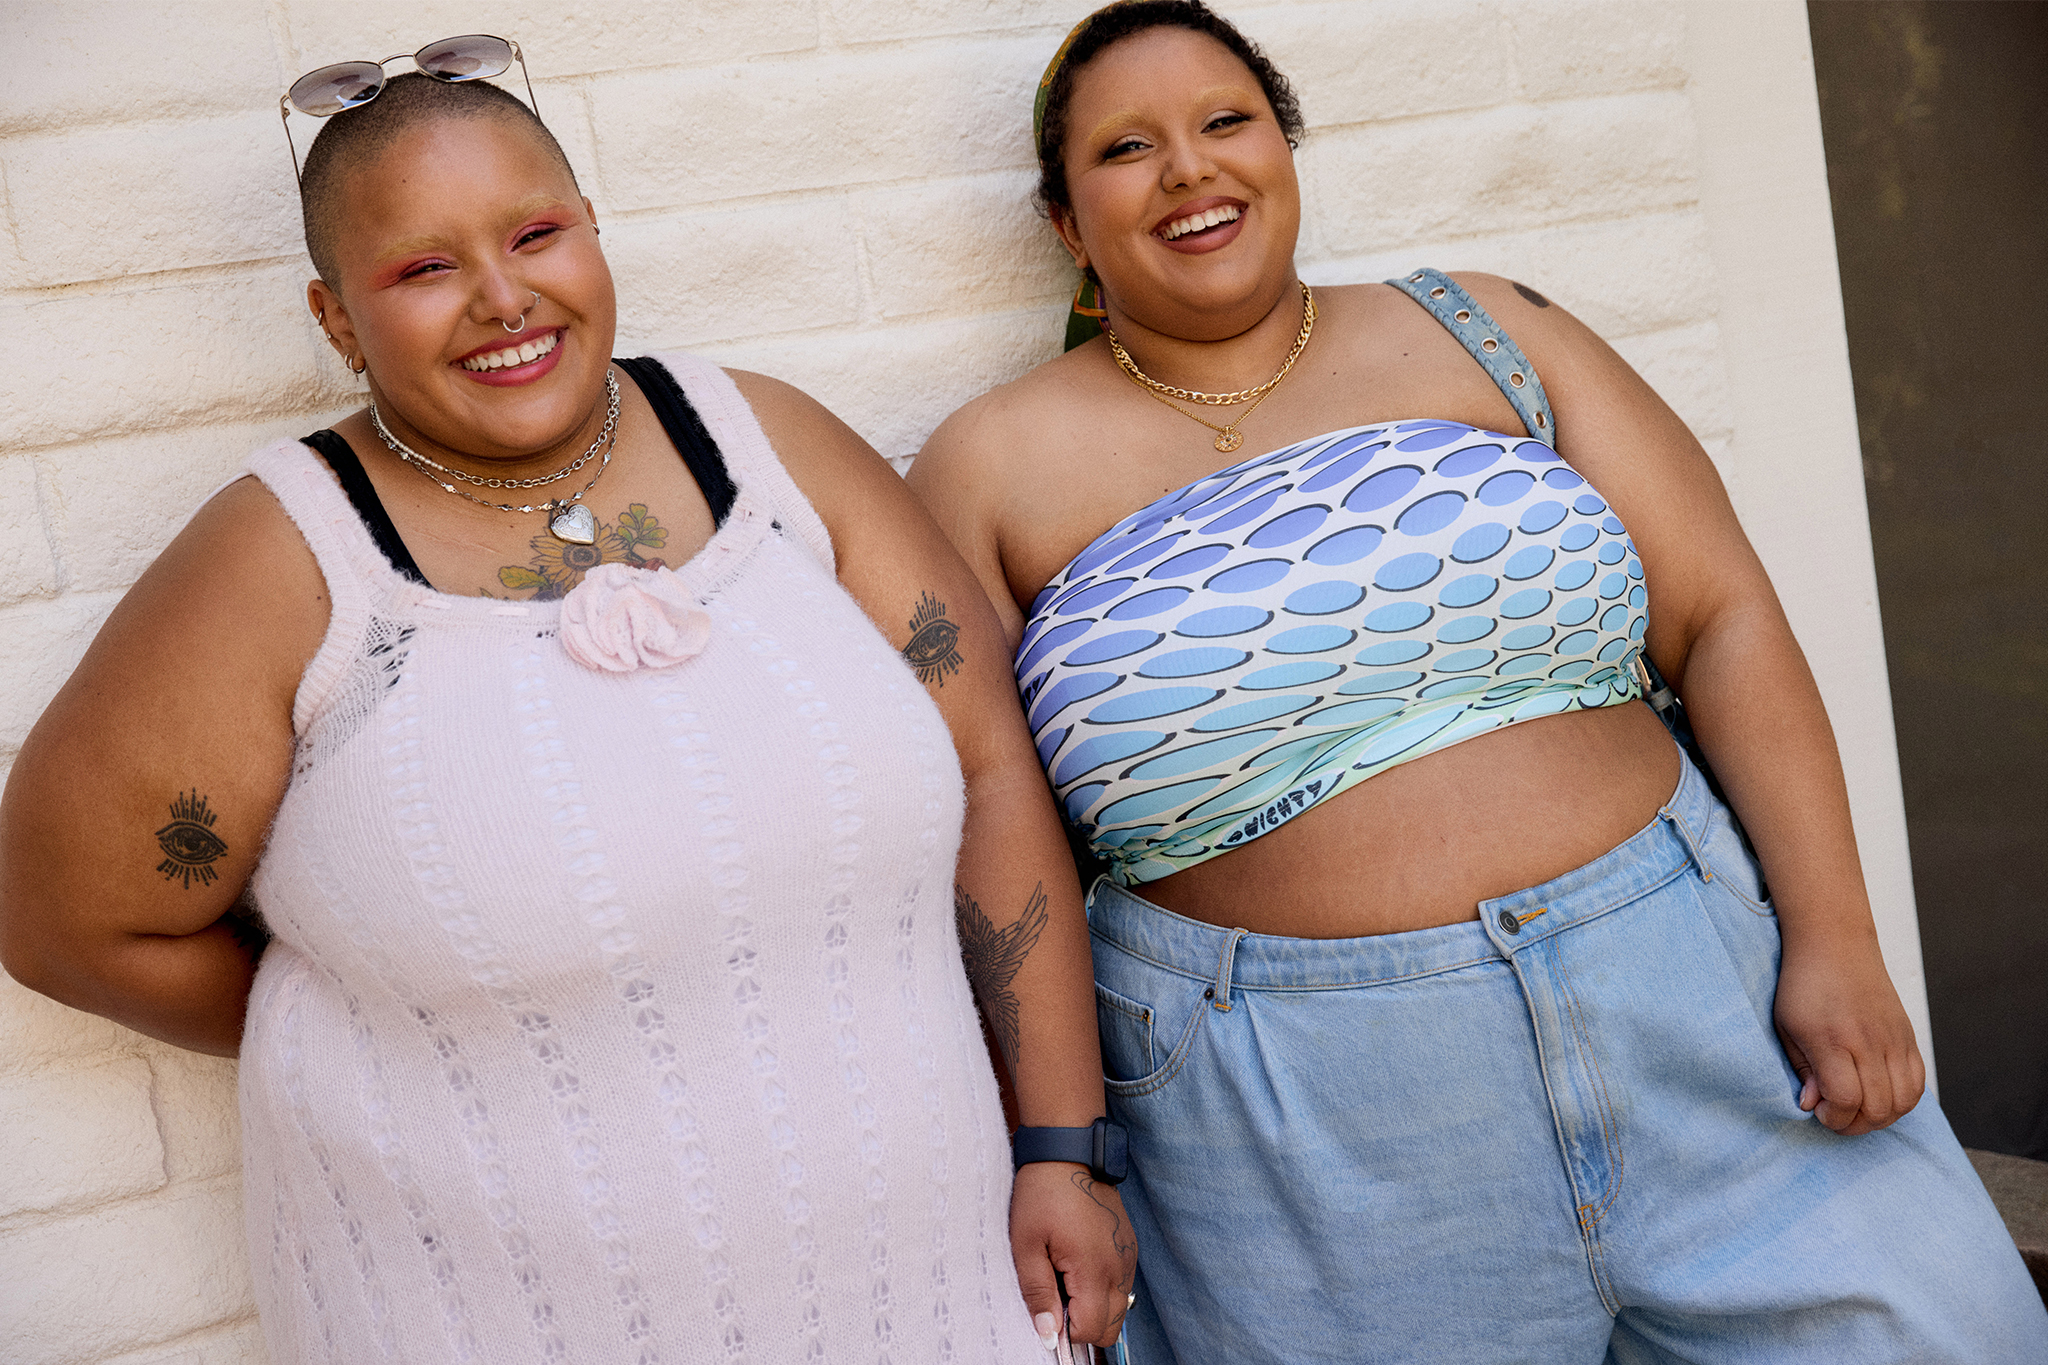 Tahra and Kyrah wearing summer fashion smiling leaning towards each other